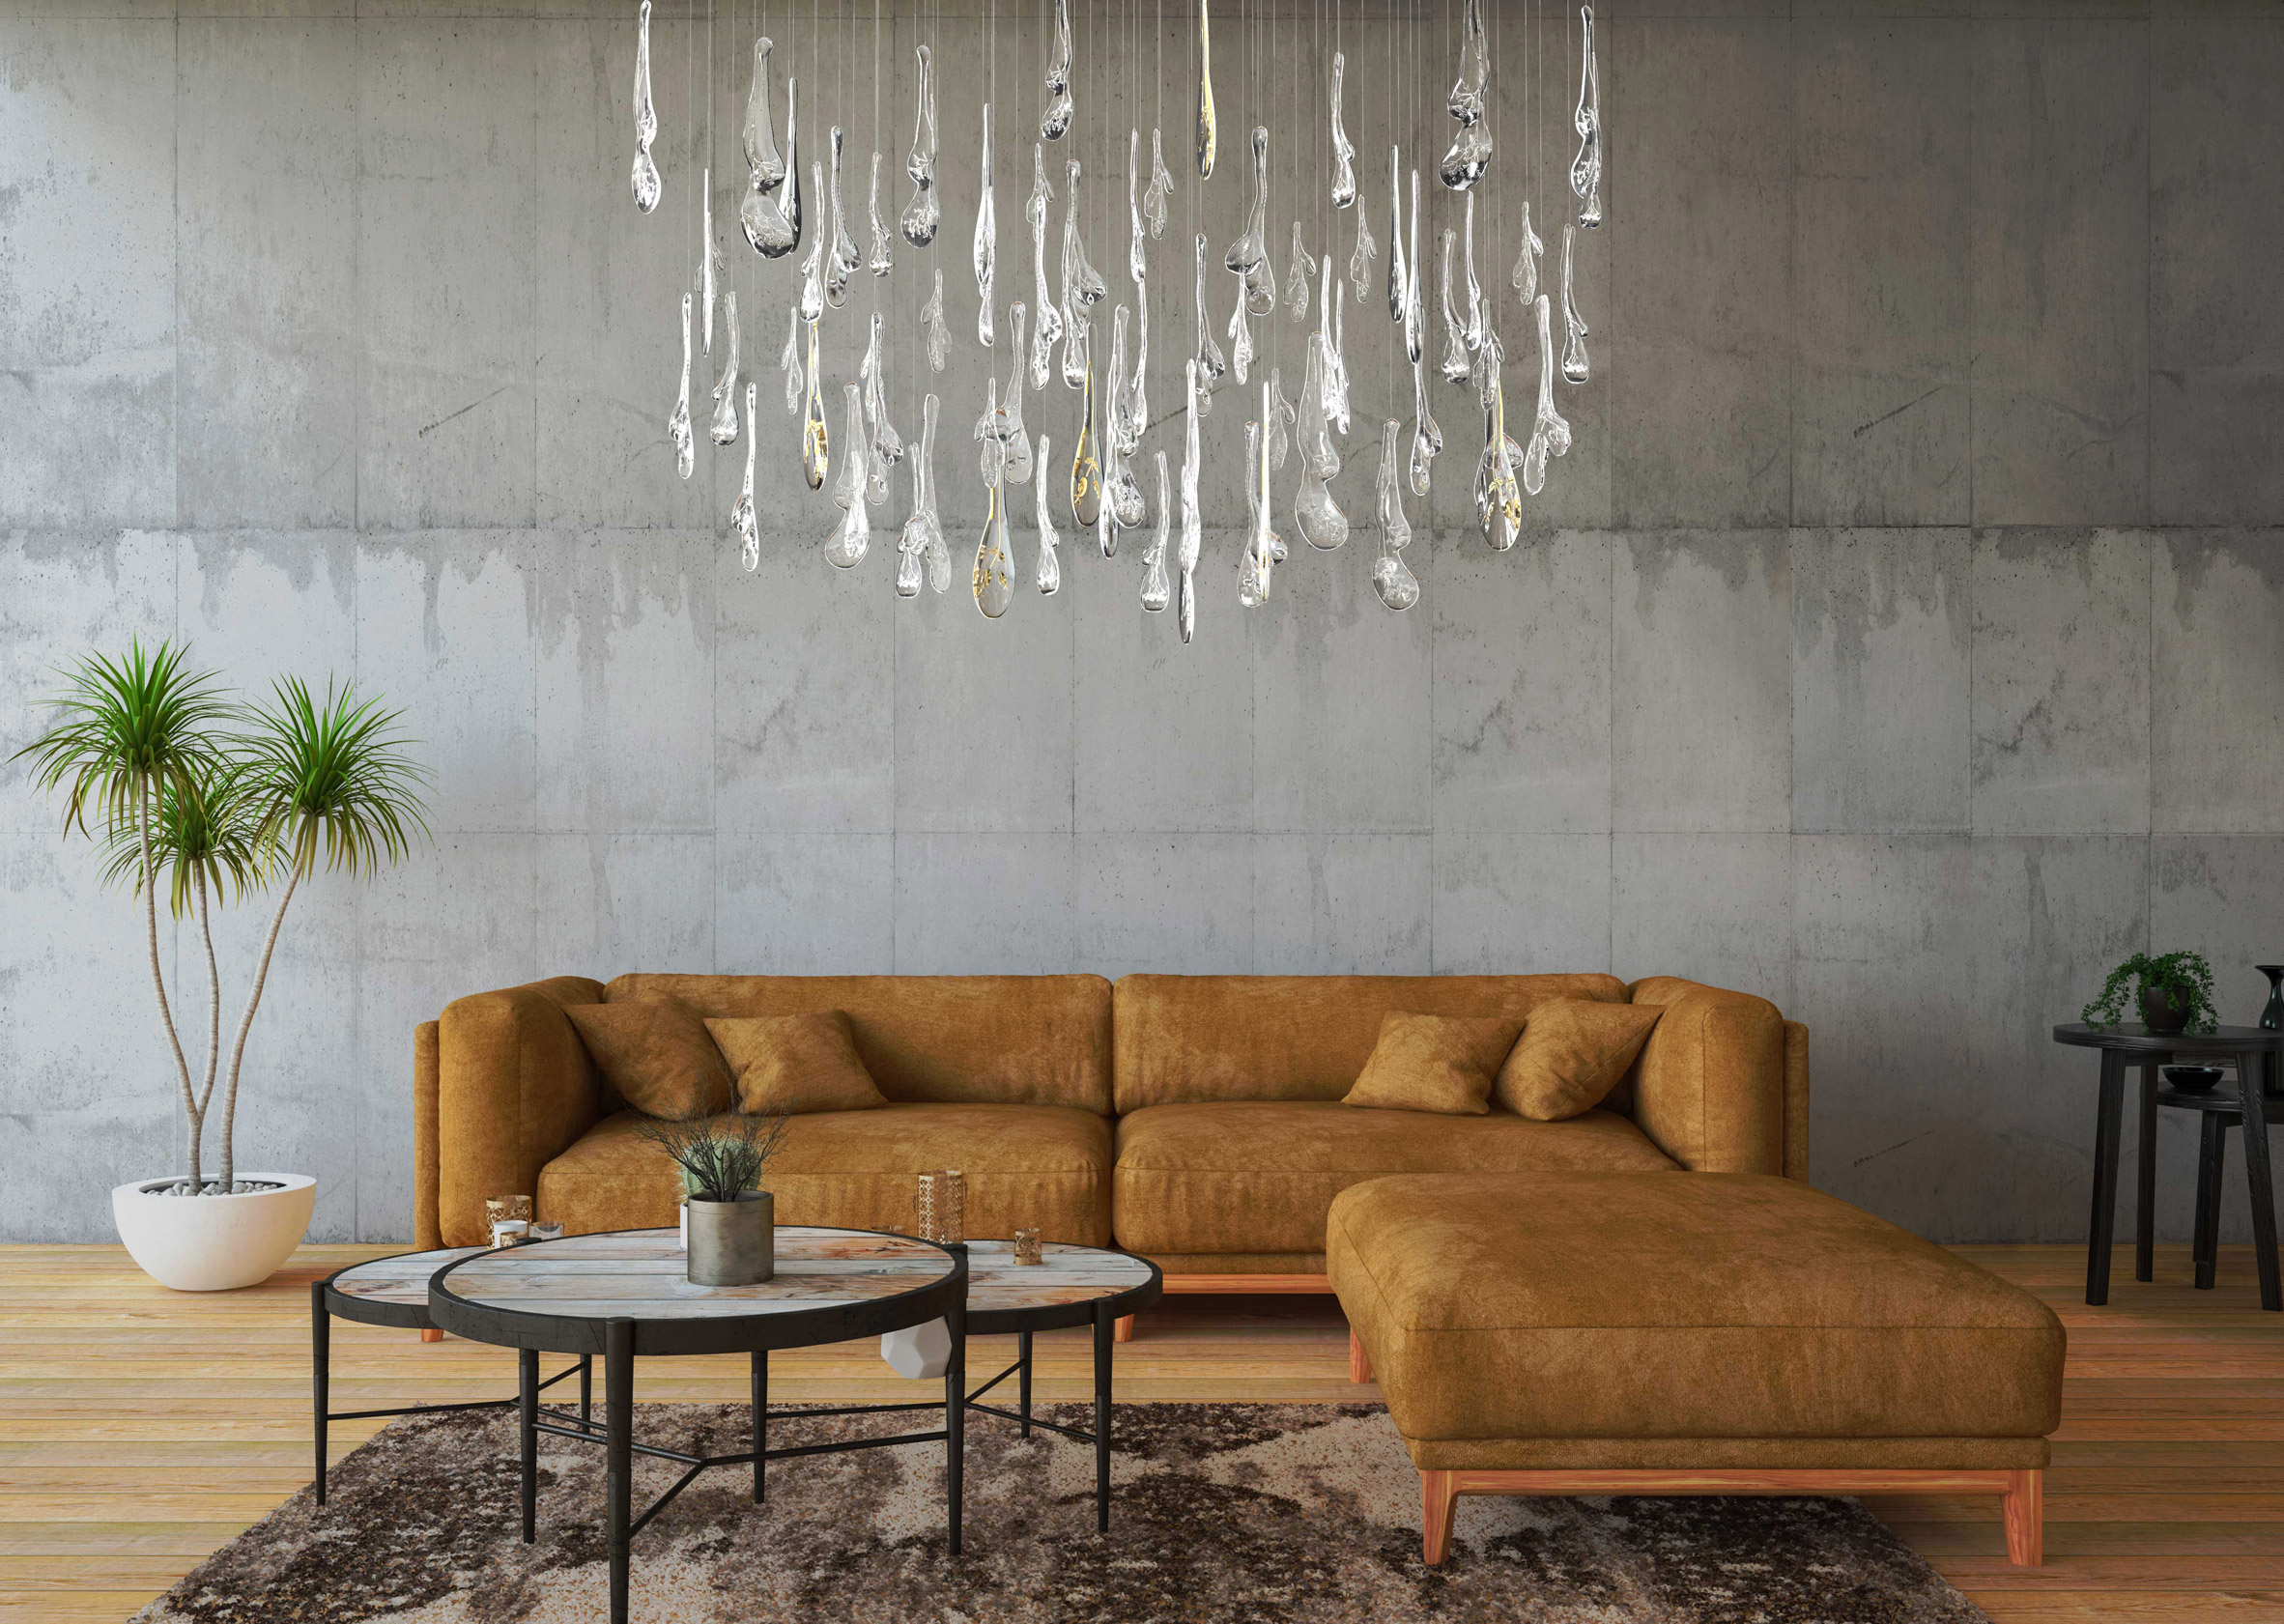 Glass lighting installation by Maria Culenova hanging over a brown sofa in a living room